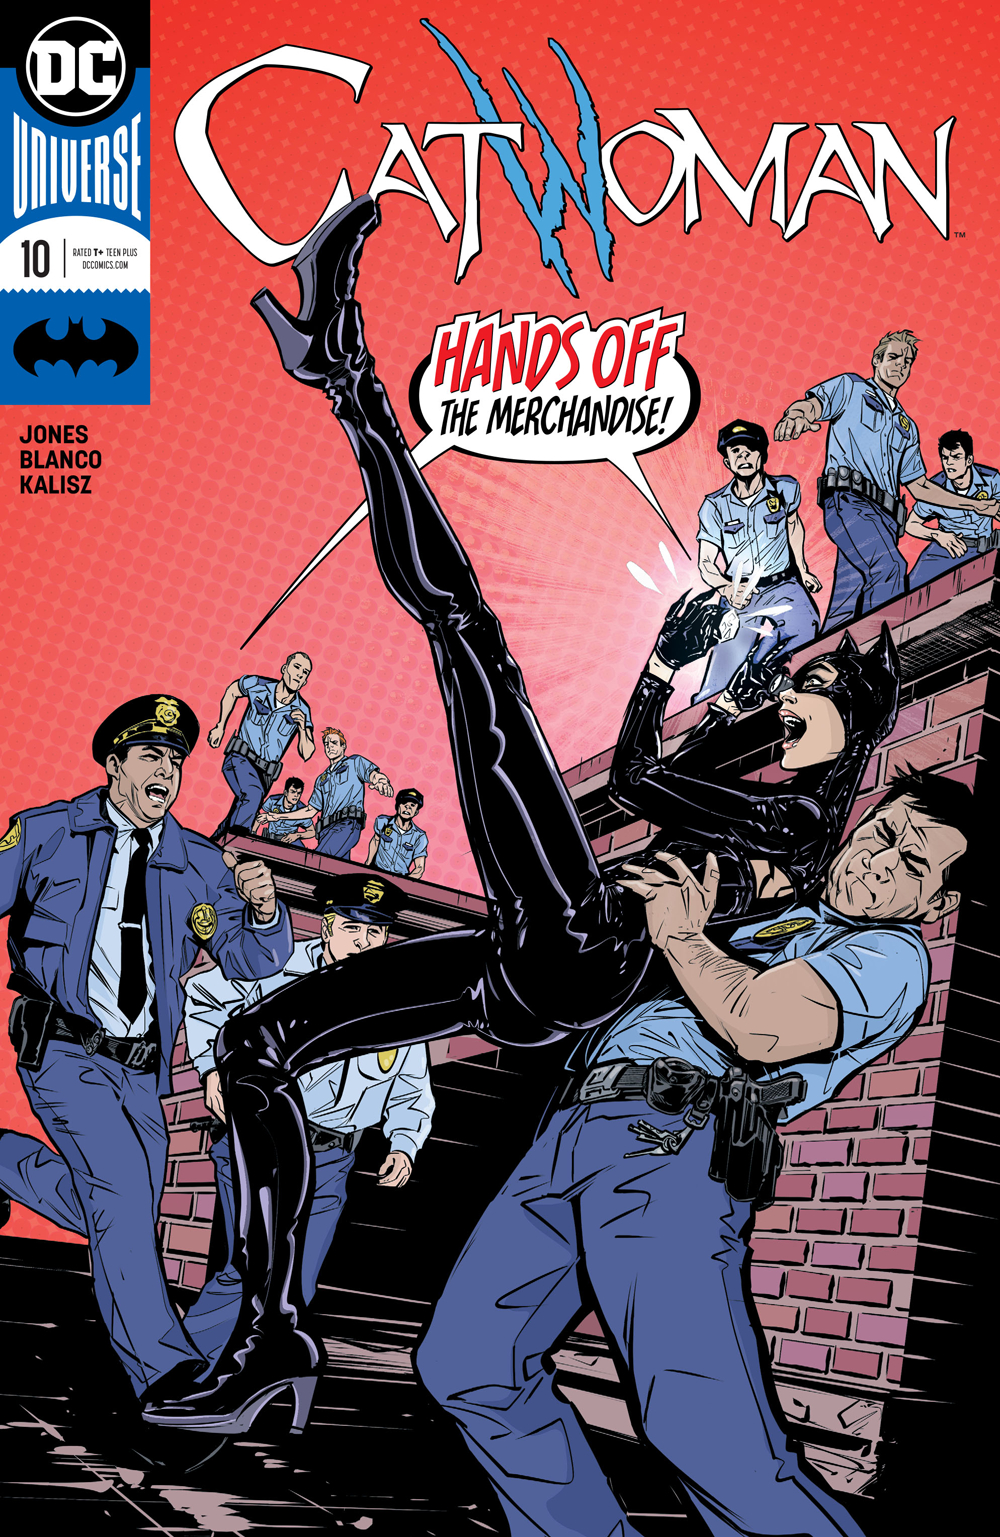 CATWOMAN #10